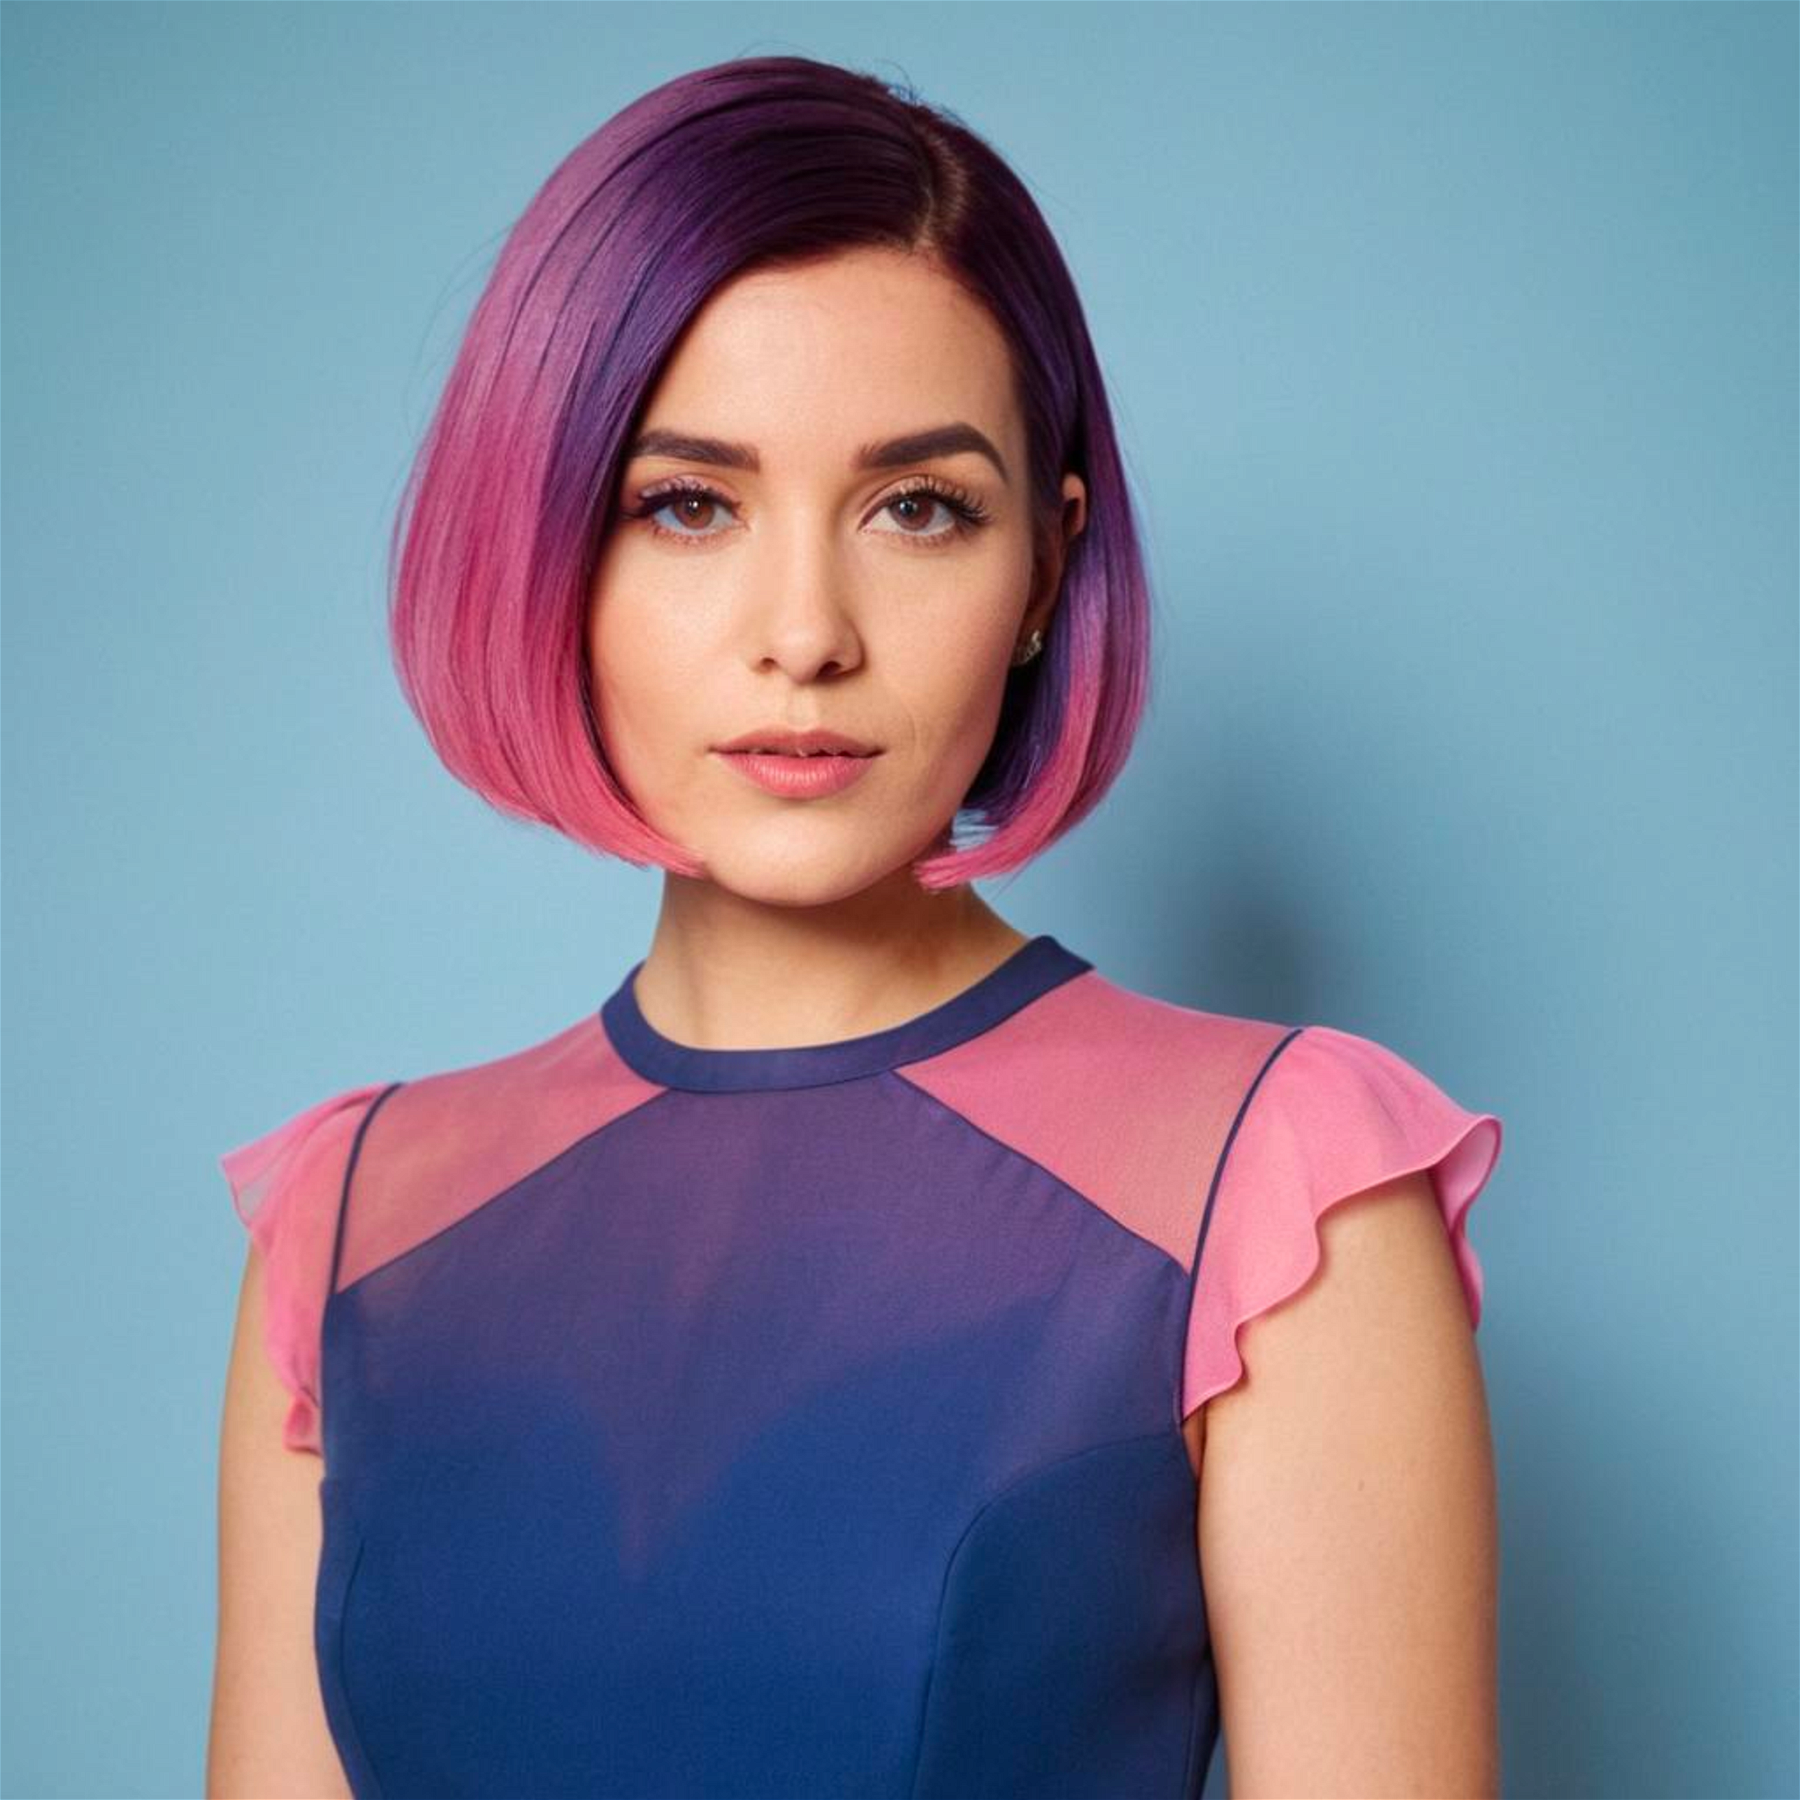 Blunt bob, purple hair with pink ombre